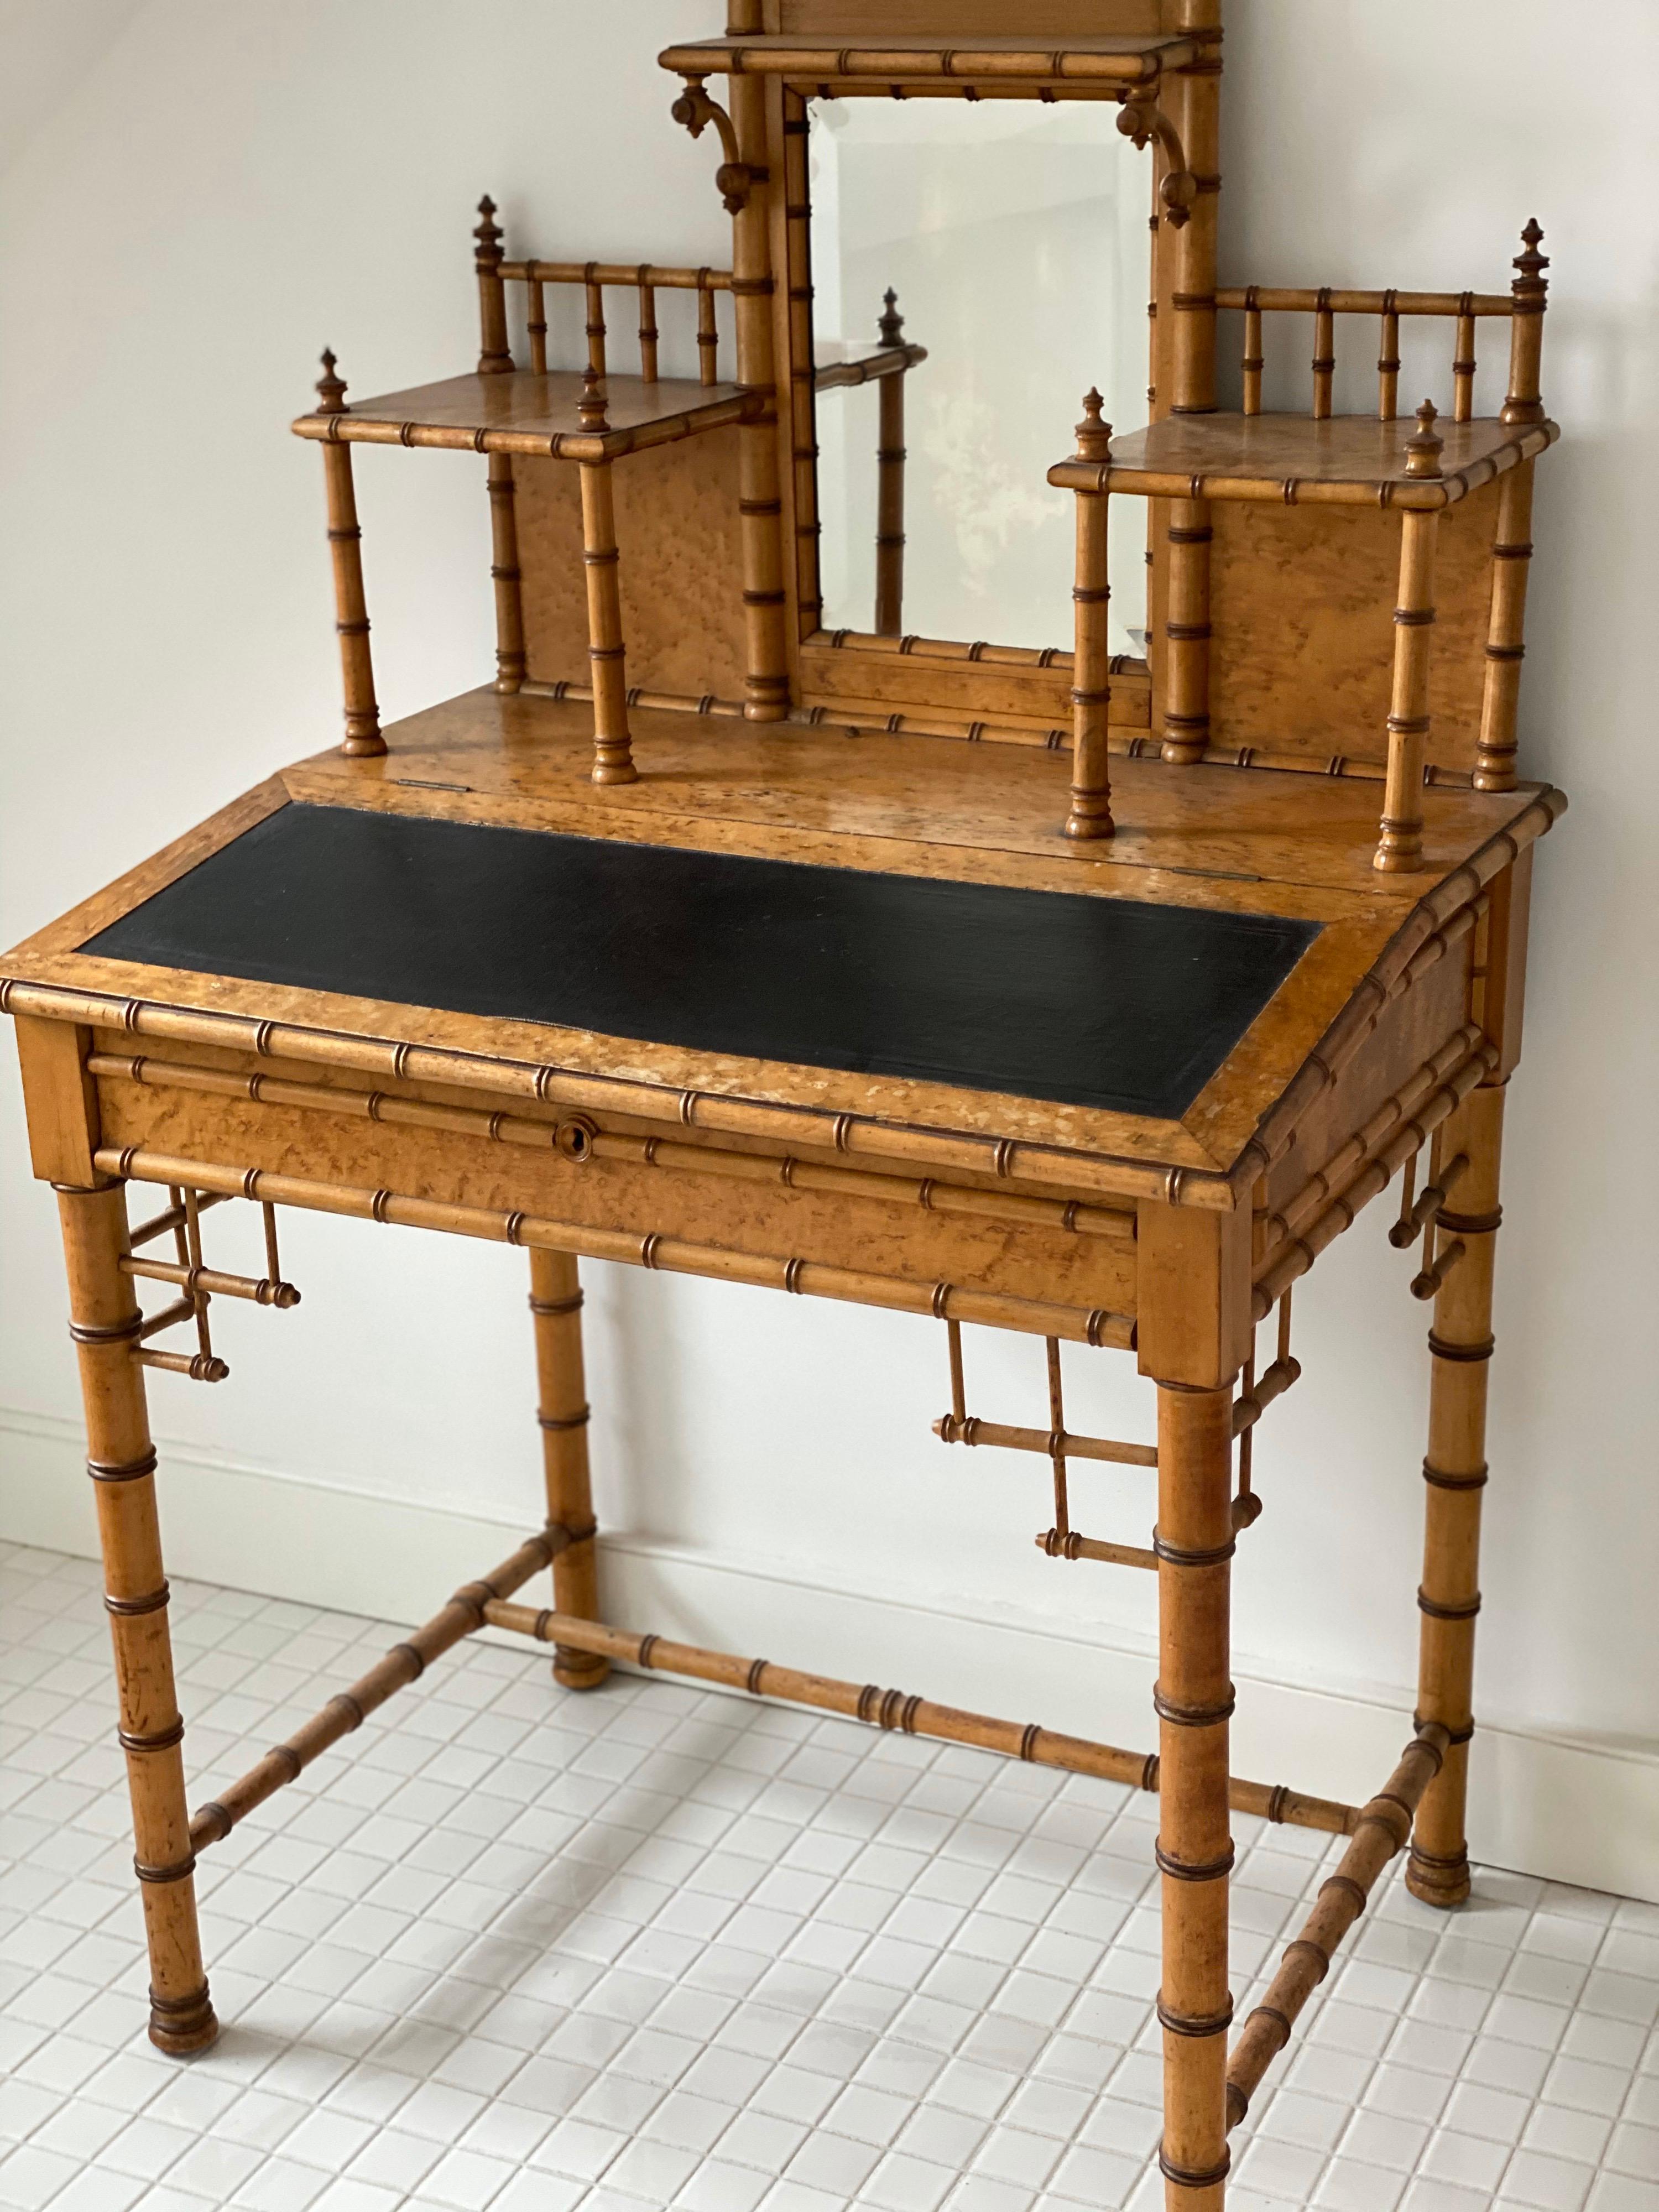 19th century French bird's-eye maple faux bamboo ladies writing desk.
Beautifully delicate bamboo details.
Structurally very good condition. Water marks to finish on top.
Dimensions:
31